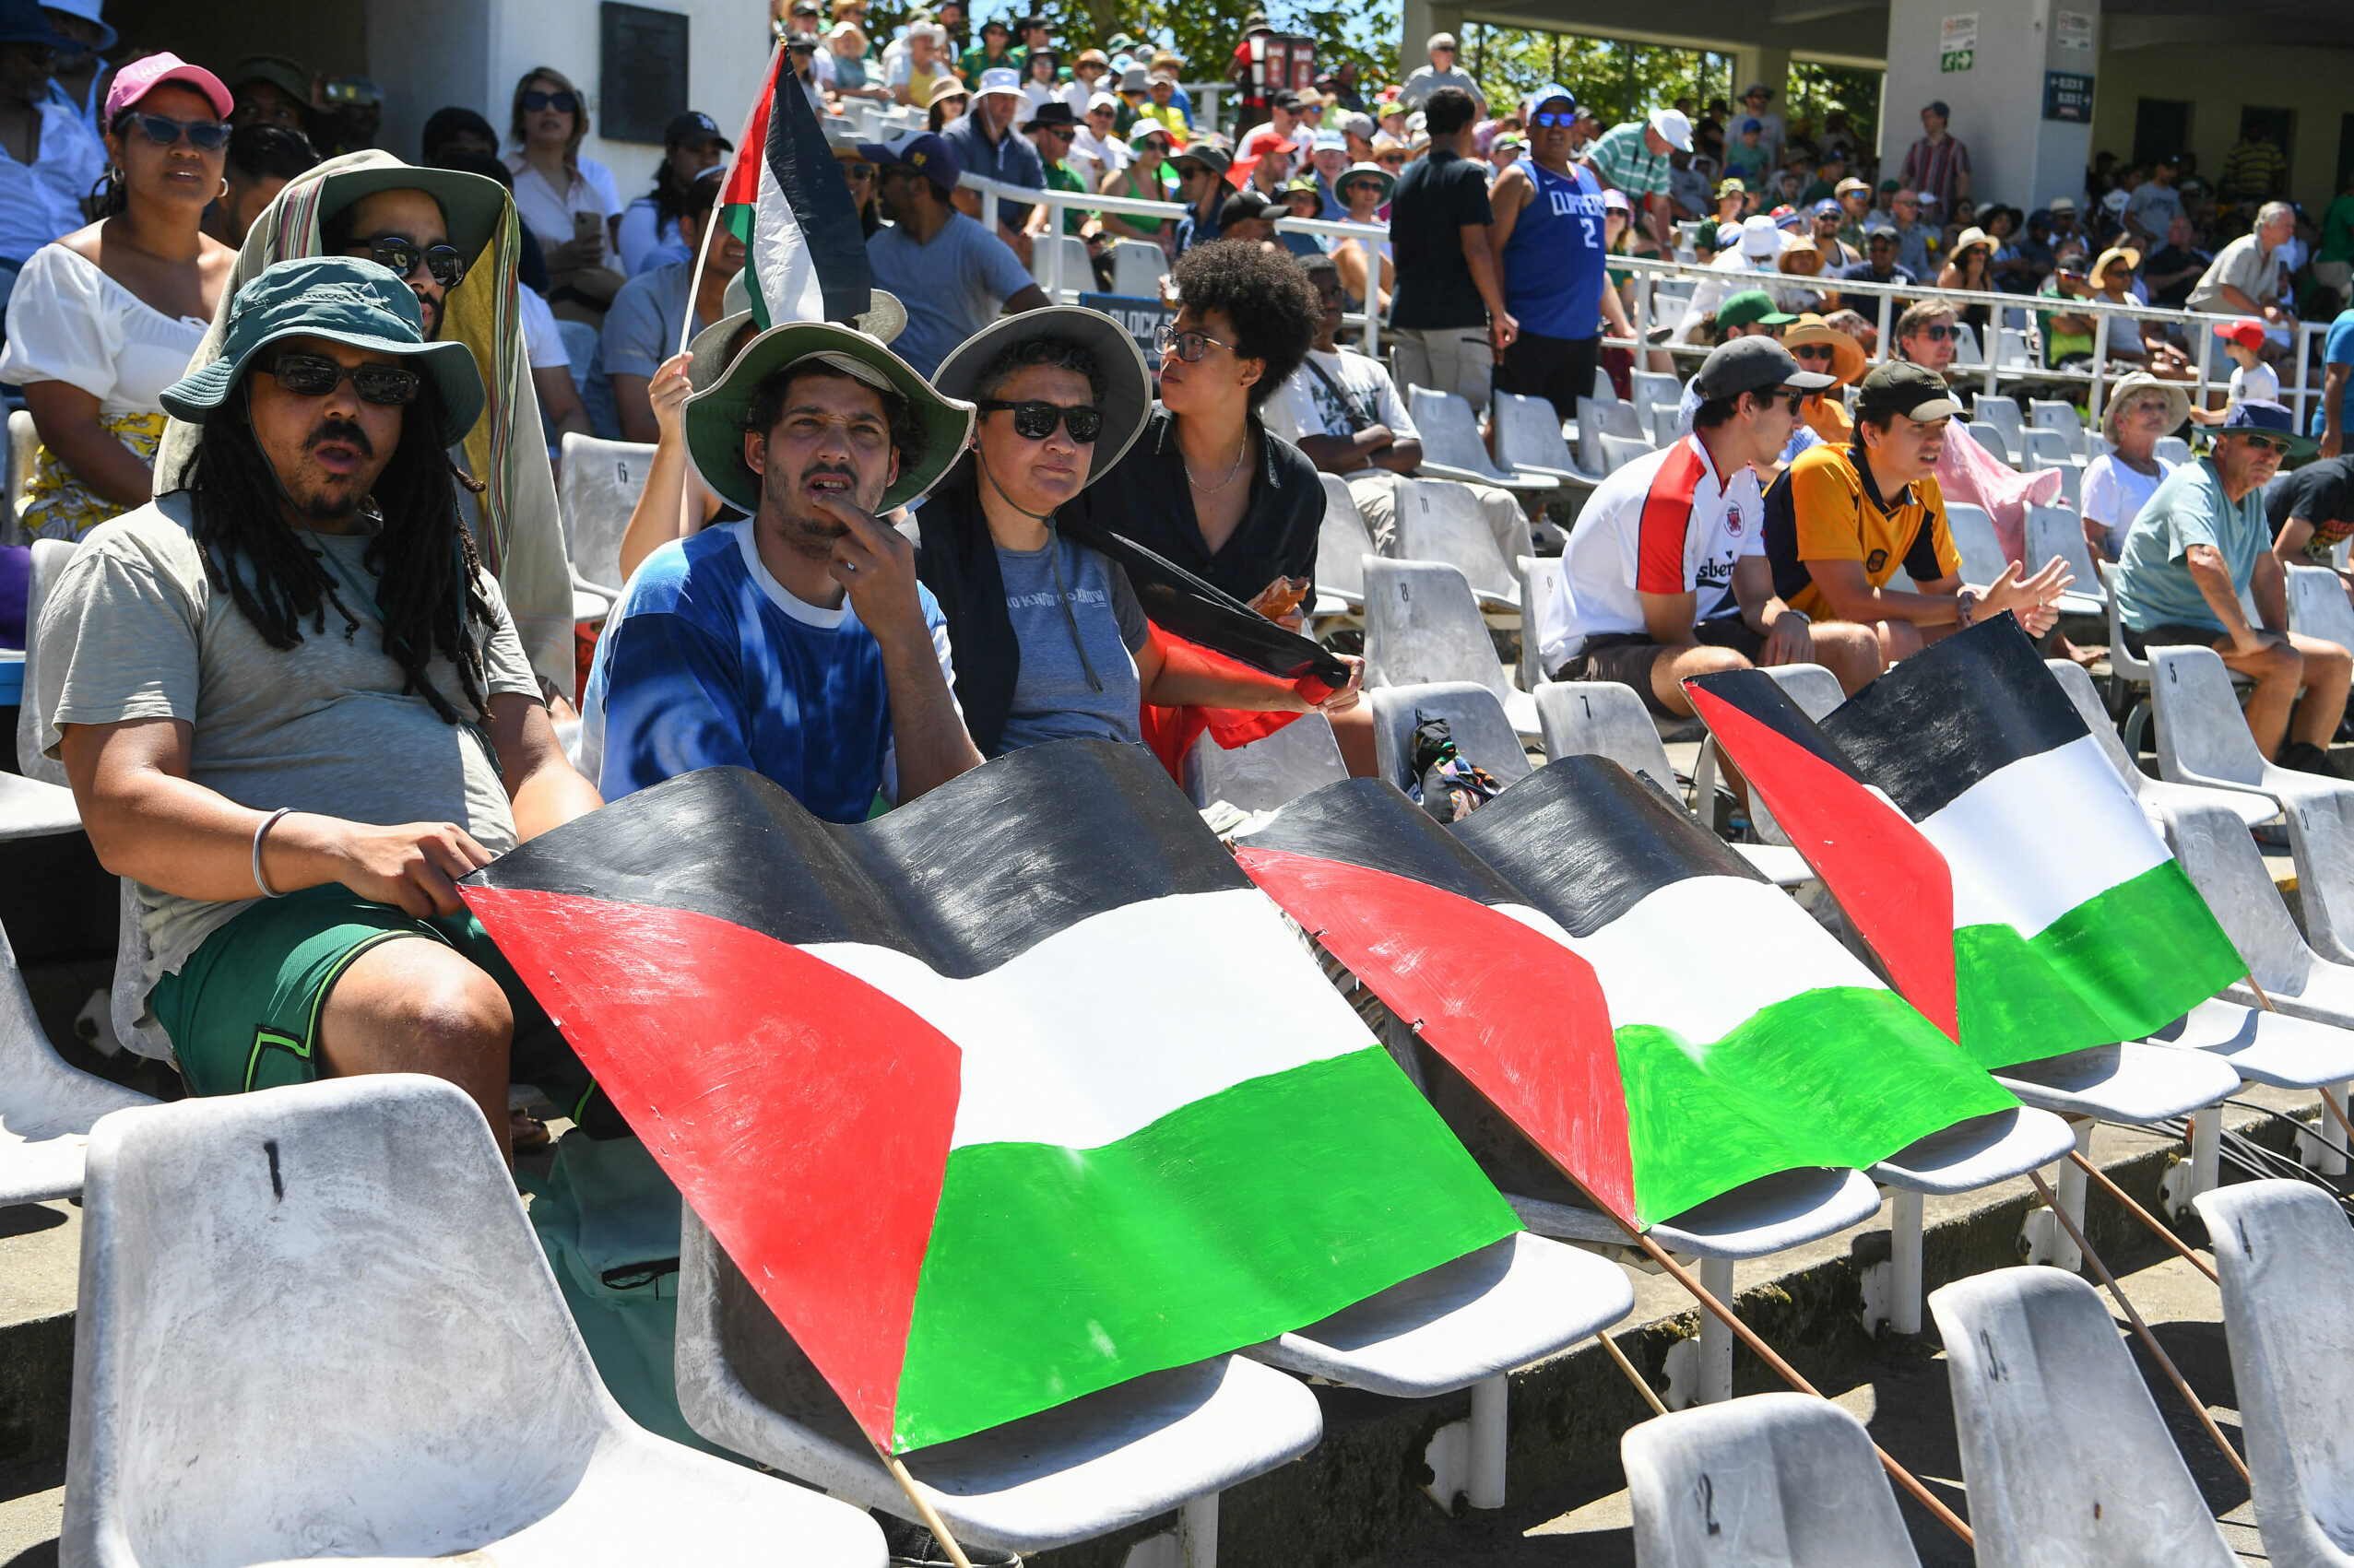 The Palestine flag colours displayed by spectators in the SA vs IND New Year's Test